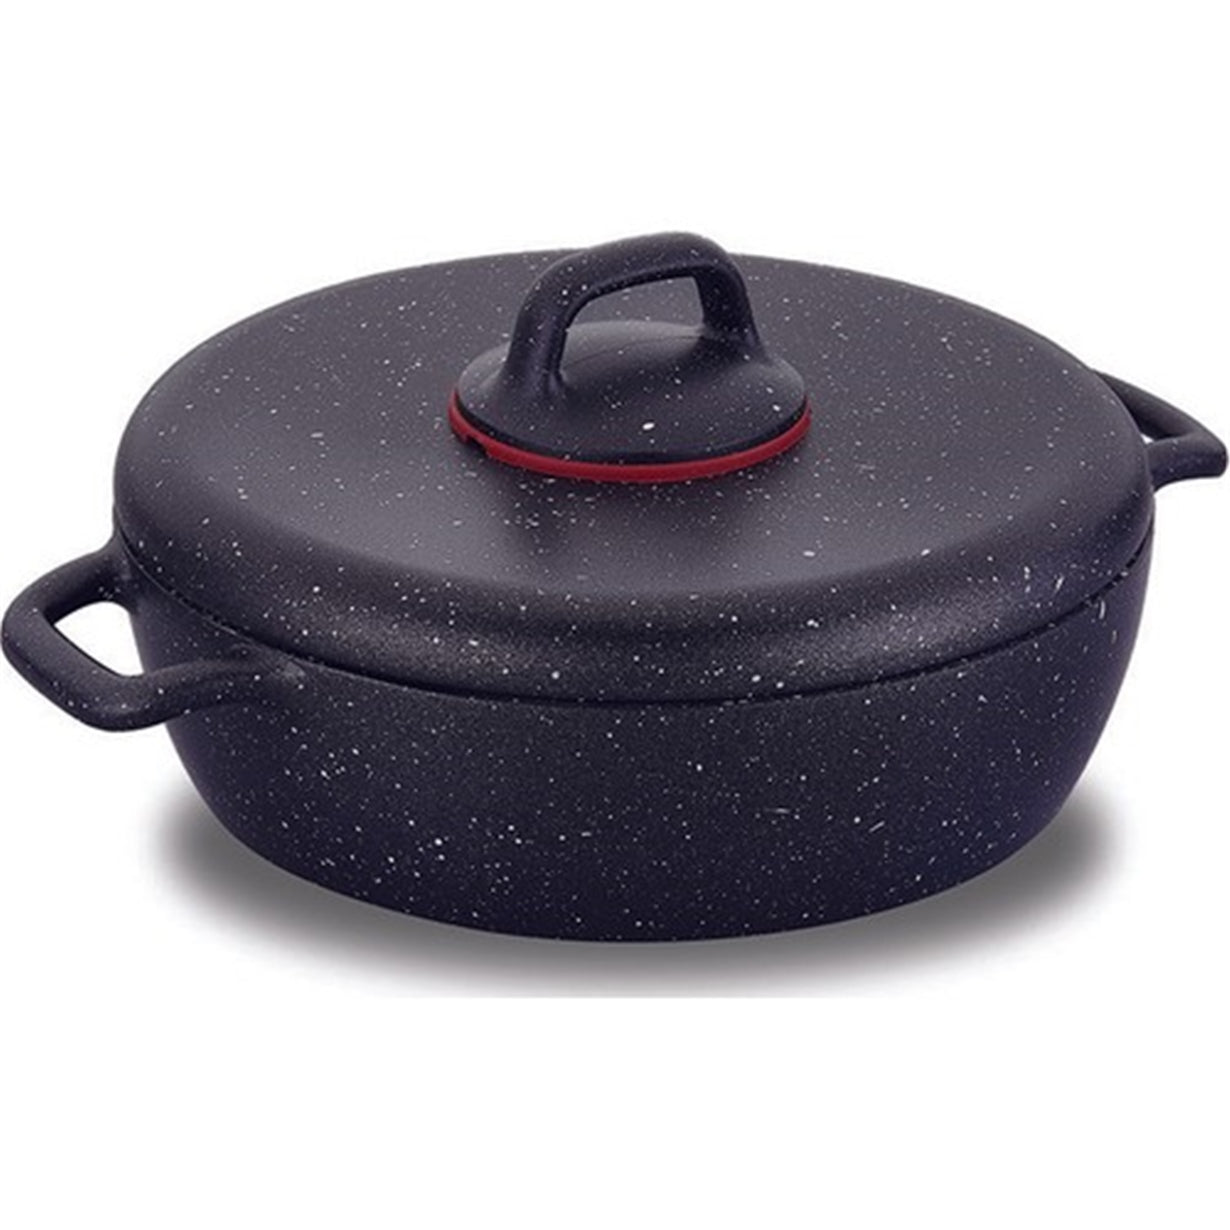 2.5L Gusto Low Casserole With Lid